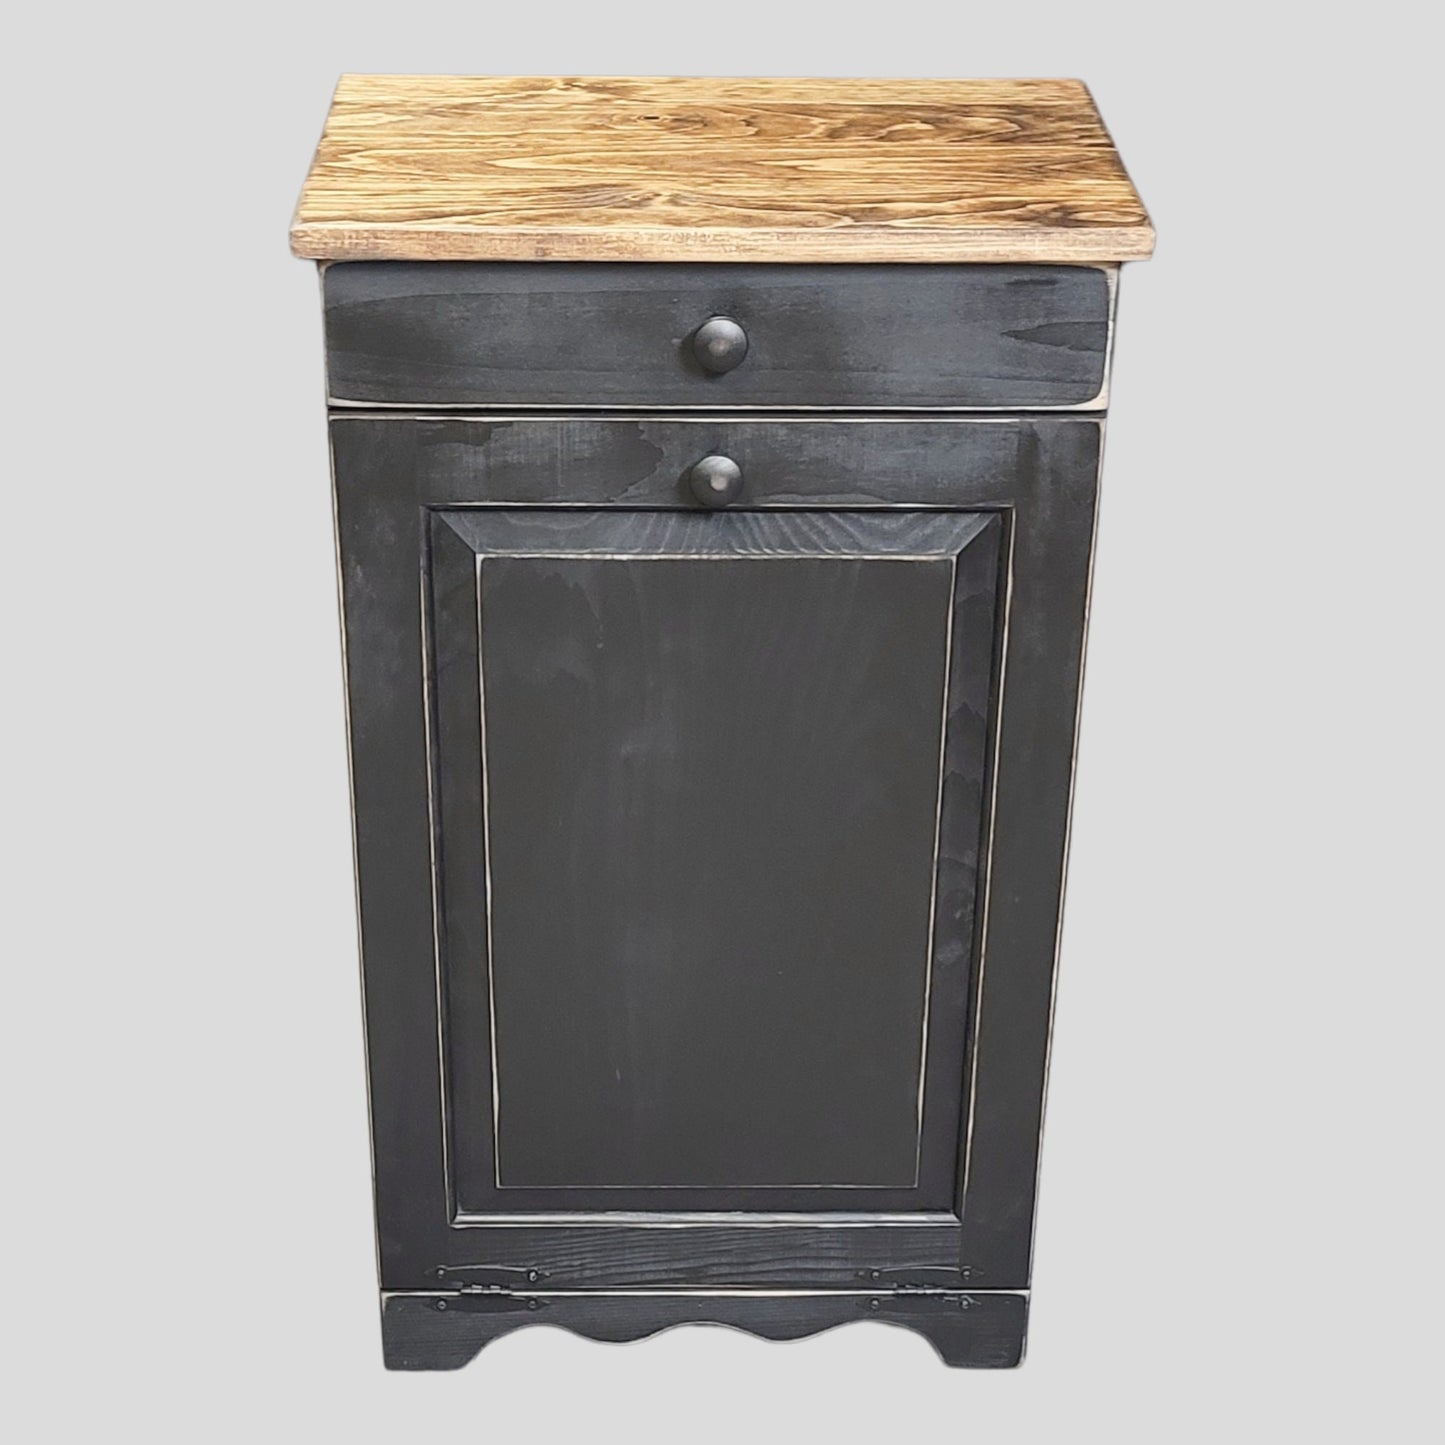 Tilt out rustic trash bin / tilt out laundry bin / Farmhouse style trash can / Wooden flip out trash can / Rustic kitchen garbage can